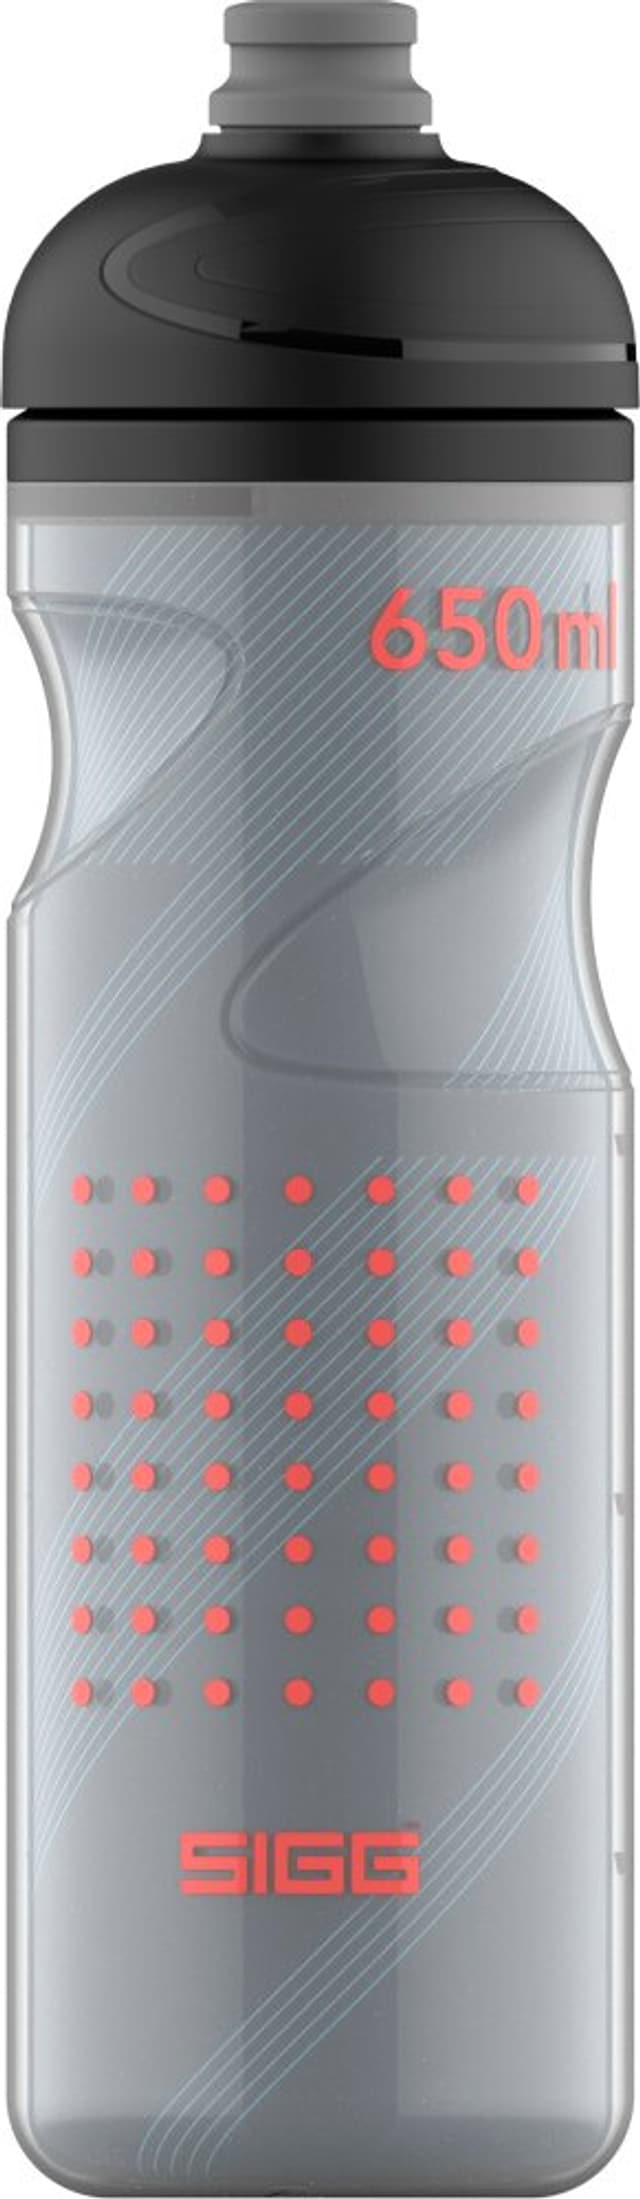 sigg Pulsar Therm Bouteille isotherme gris-claire